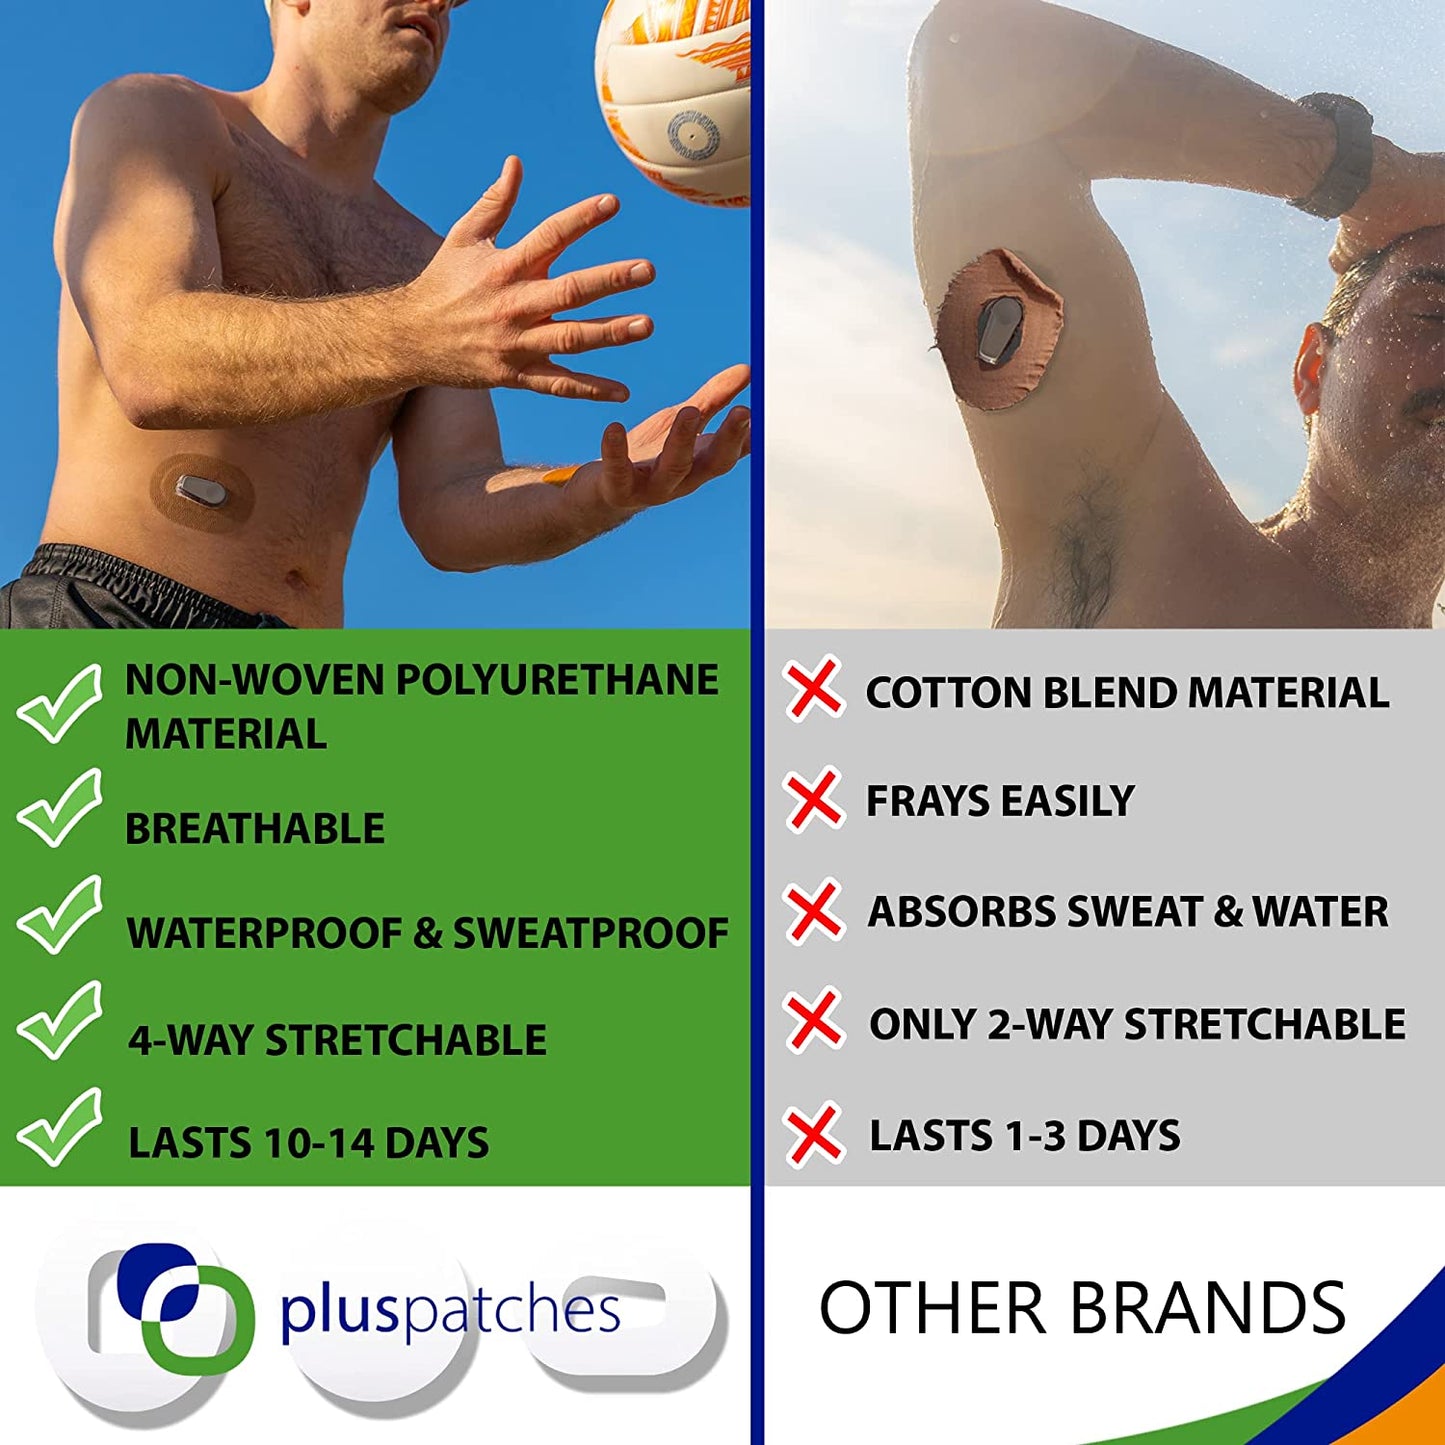 Plus Patches CGM Overlay / Cover Tape have 10-14 days holding power on your skin. The materials on the Plus Patches are designed for maximum wear time, with NO FRAYING or edge lift! The Polyurethane non-woven backing moves with your body (all around stretch) for ultimate comfort over the life of your overlay/ cover tape patch.